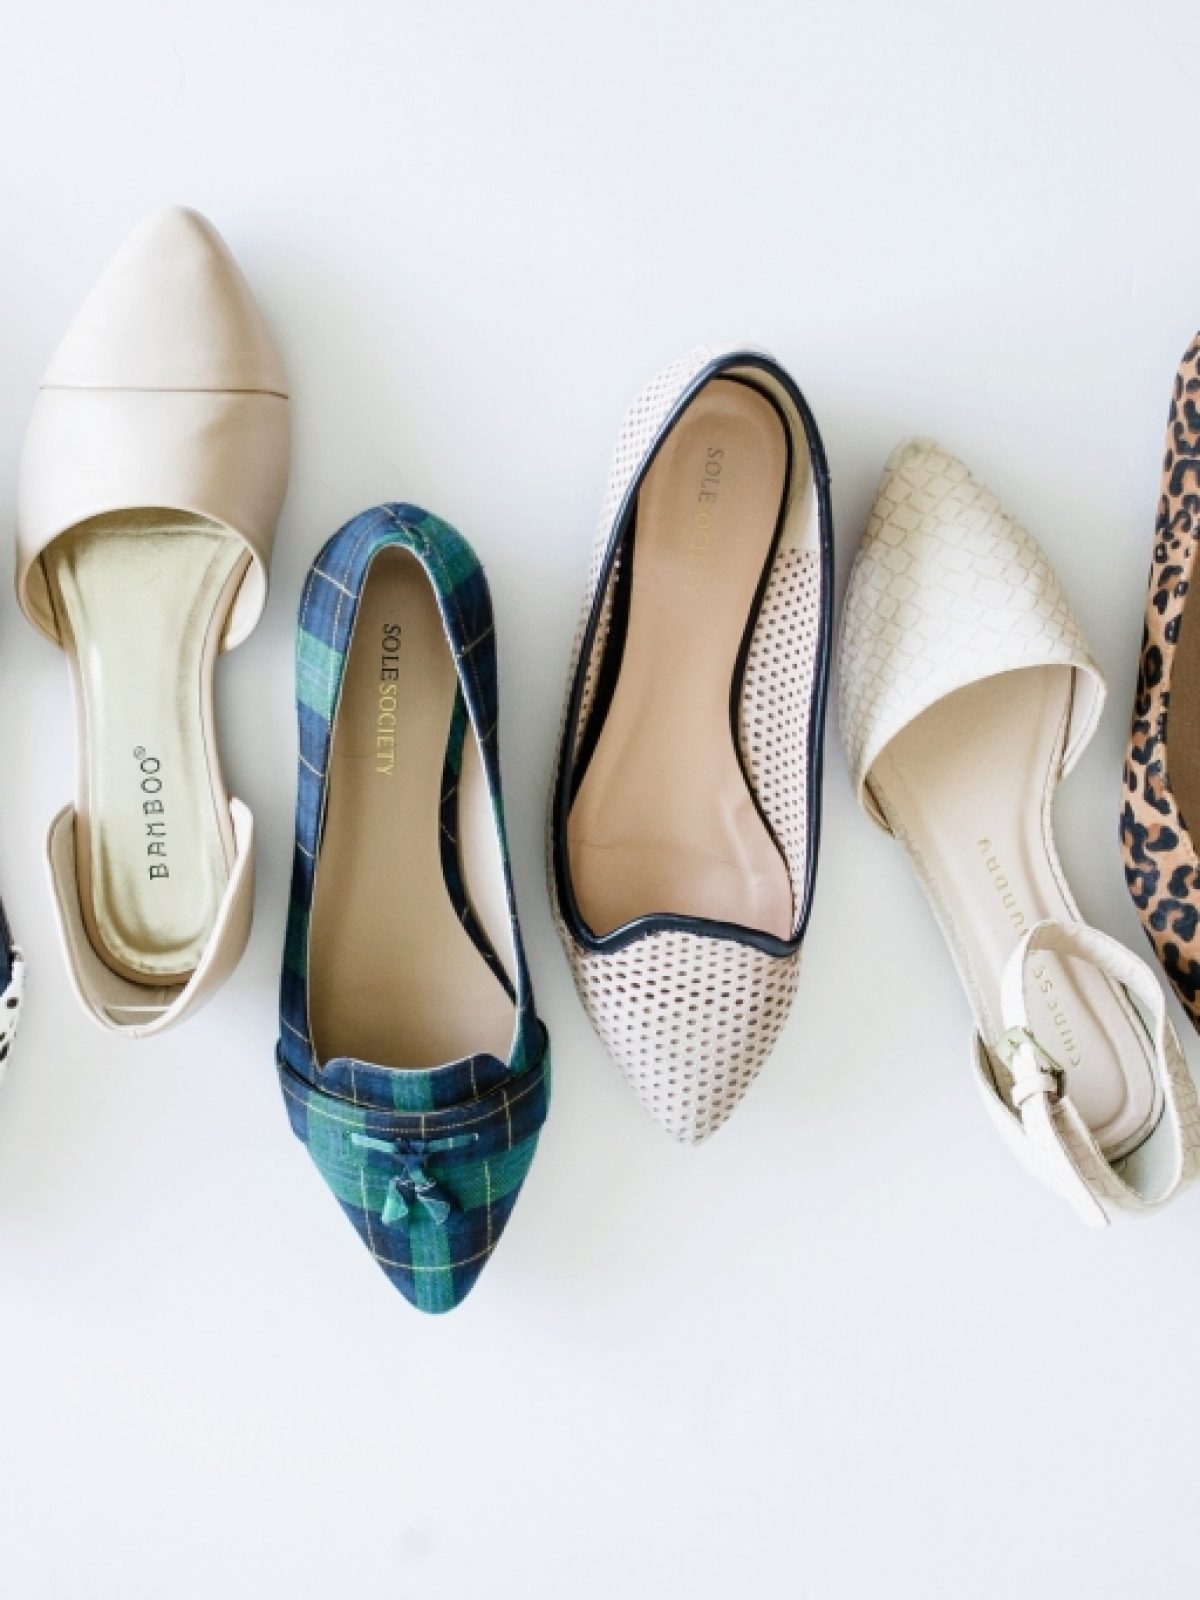 fall flats, d'orsay flats, sole society, sole + luster, chinese laundry, asos, target, shoes, fall style, atlanta style blogger